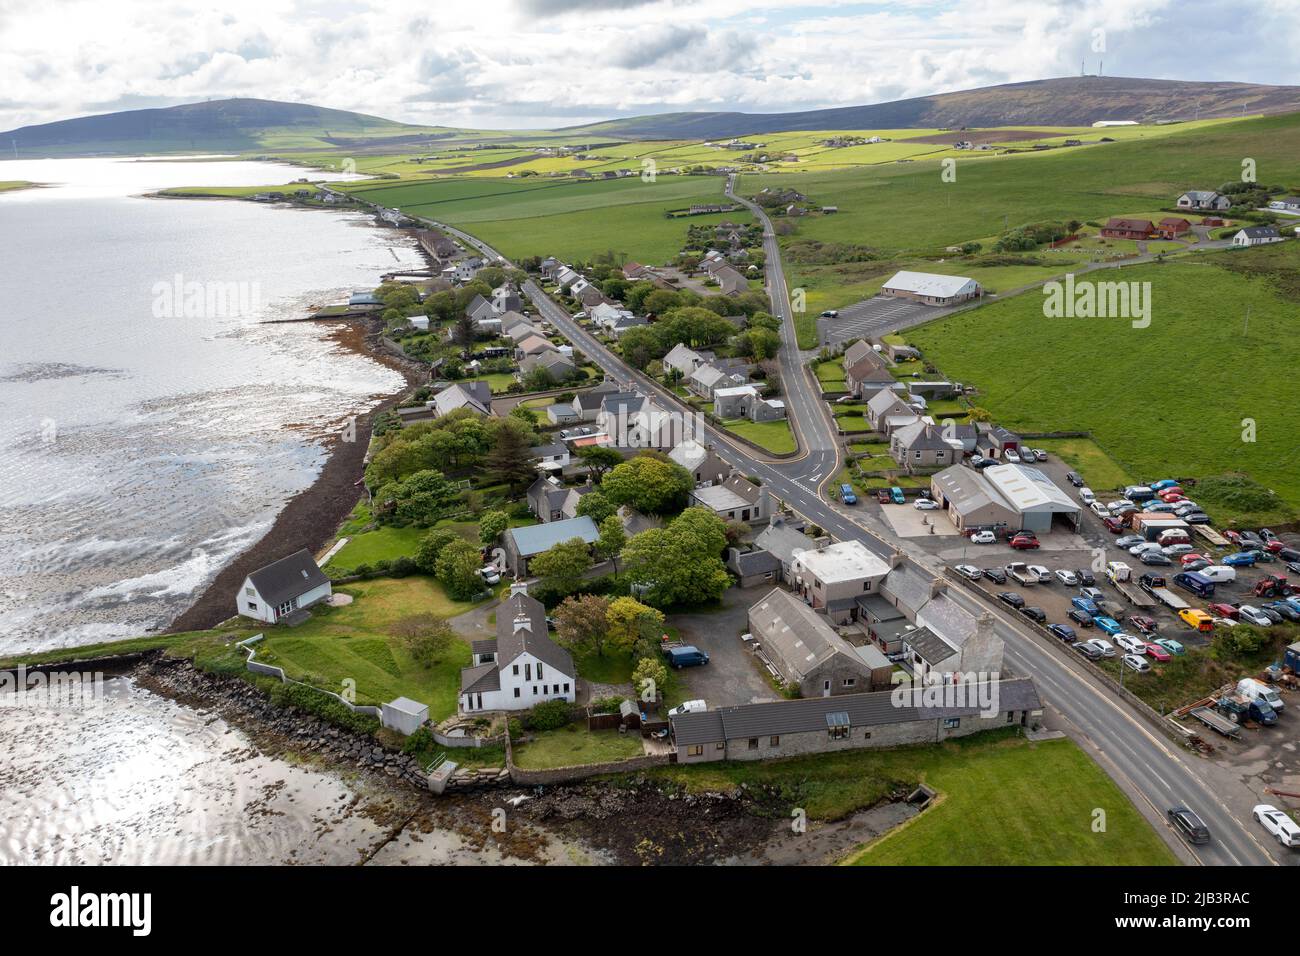 Aerial view of Finstown village, Orkney Islands, Scotland. Stock Photo